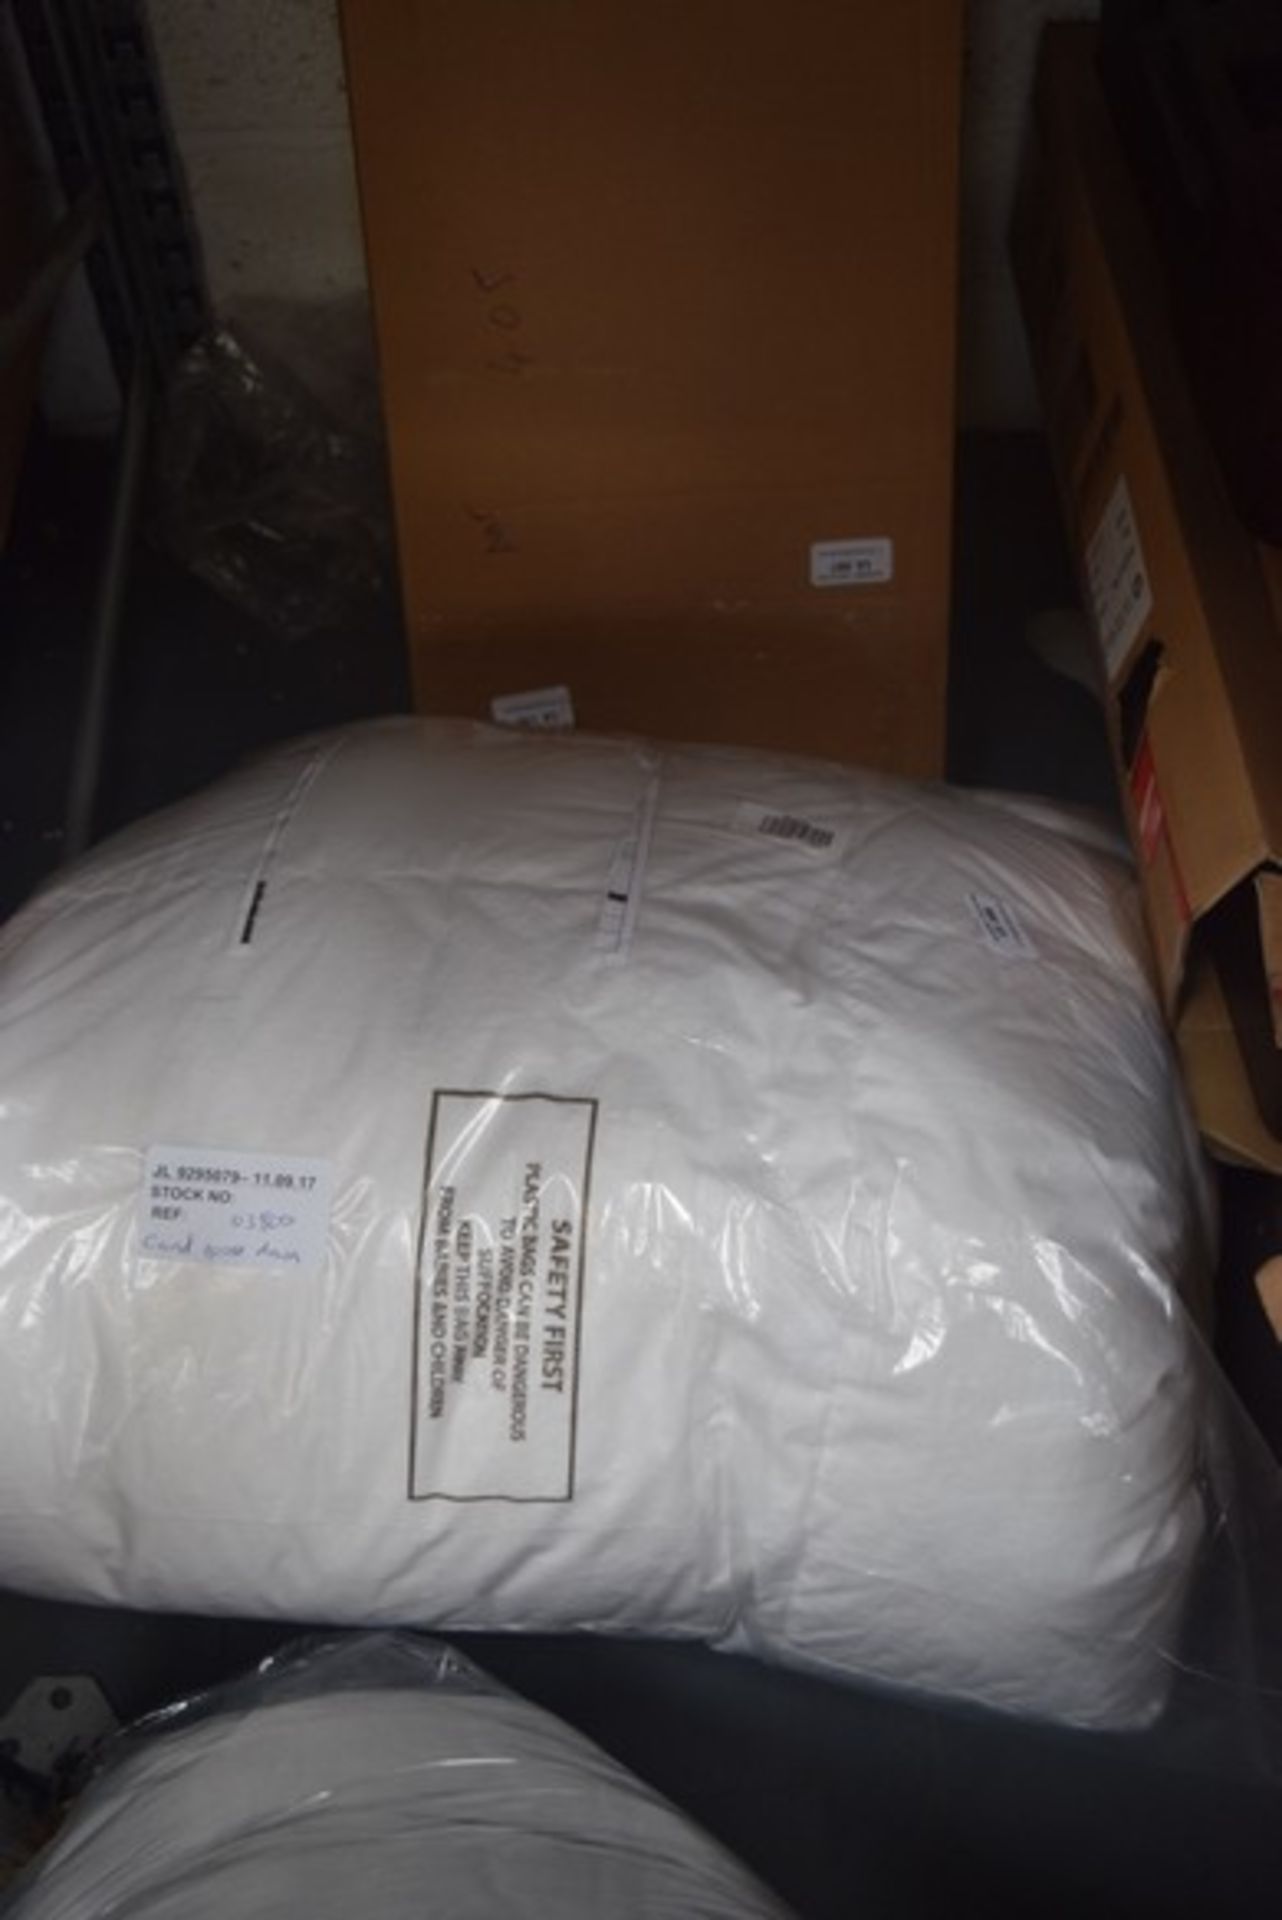 1 x DESIGNER CANADIAN GOOSE DOWN DUVET IN UNKNOWN SIZE RRP £380 11.09.17 (3440481) *PLEASE NOTE THAT